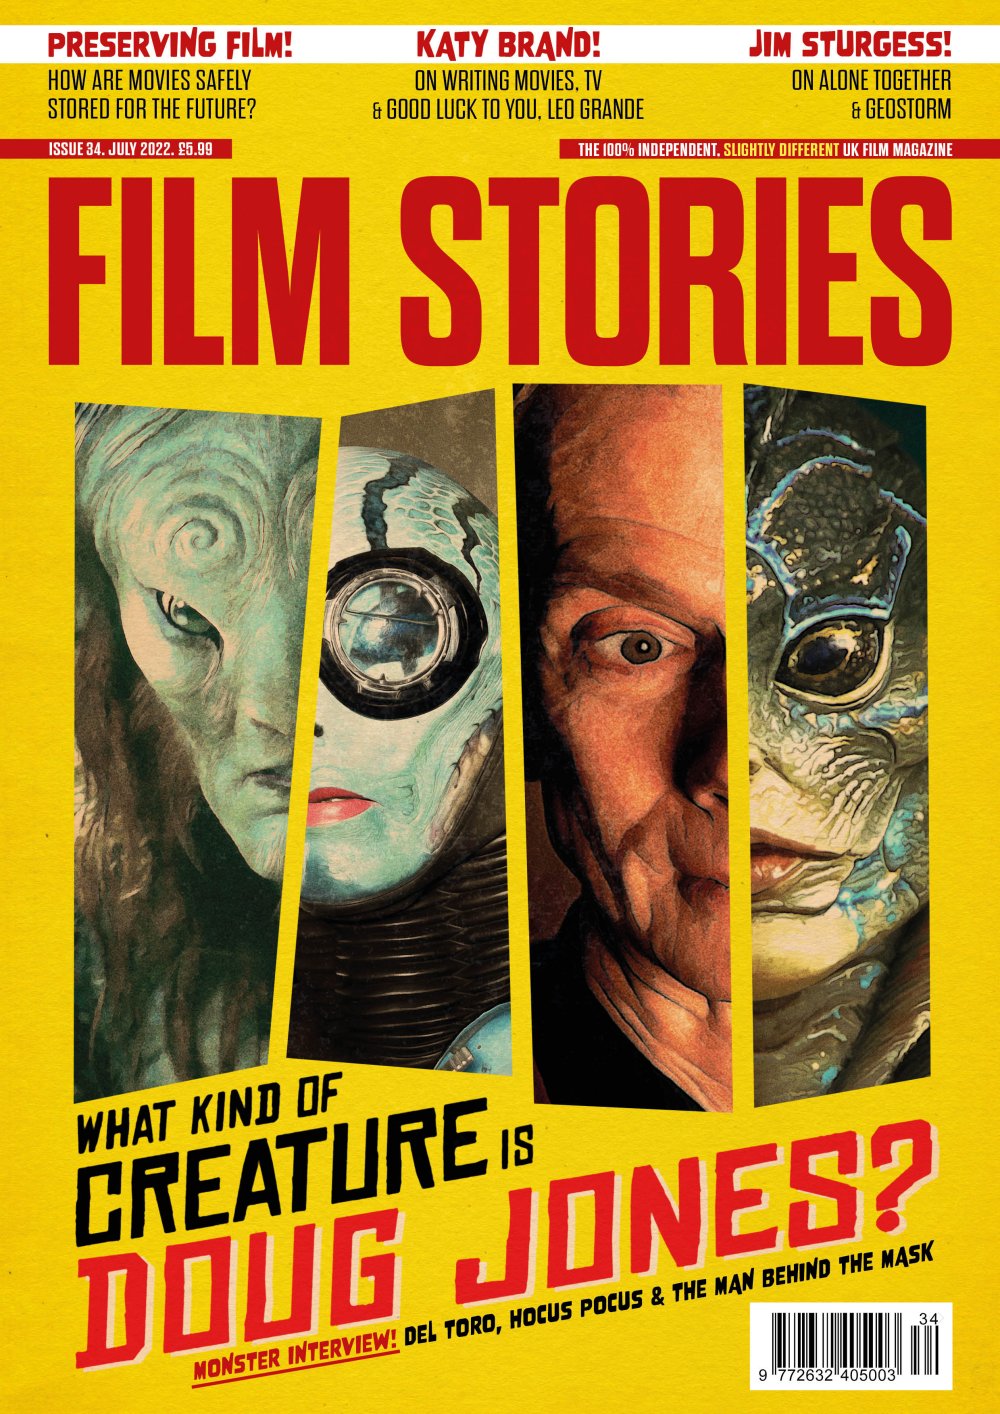 Film Stories issue 34 print edition (July 2022)